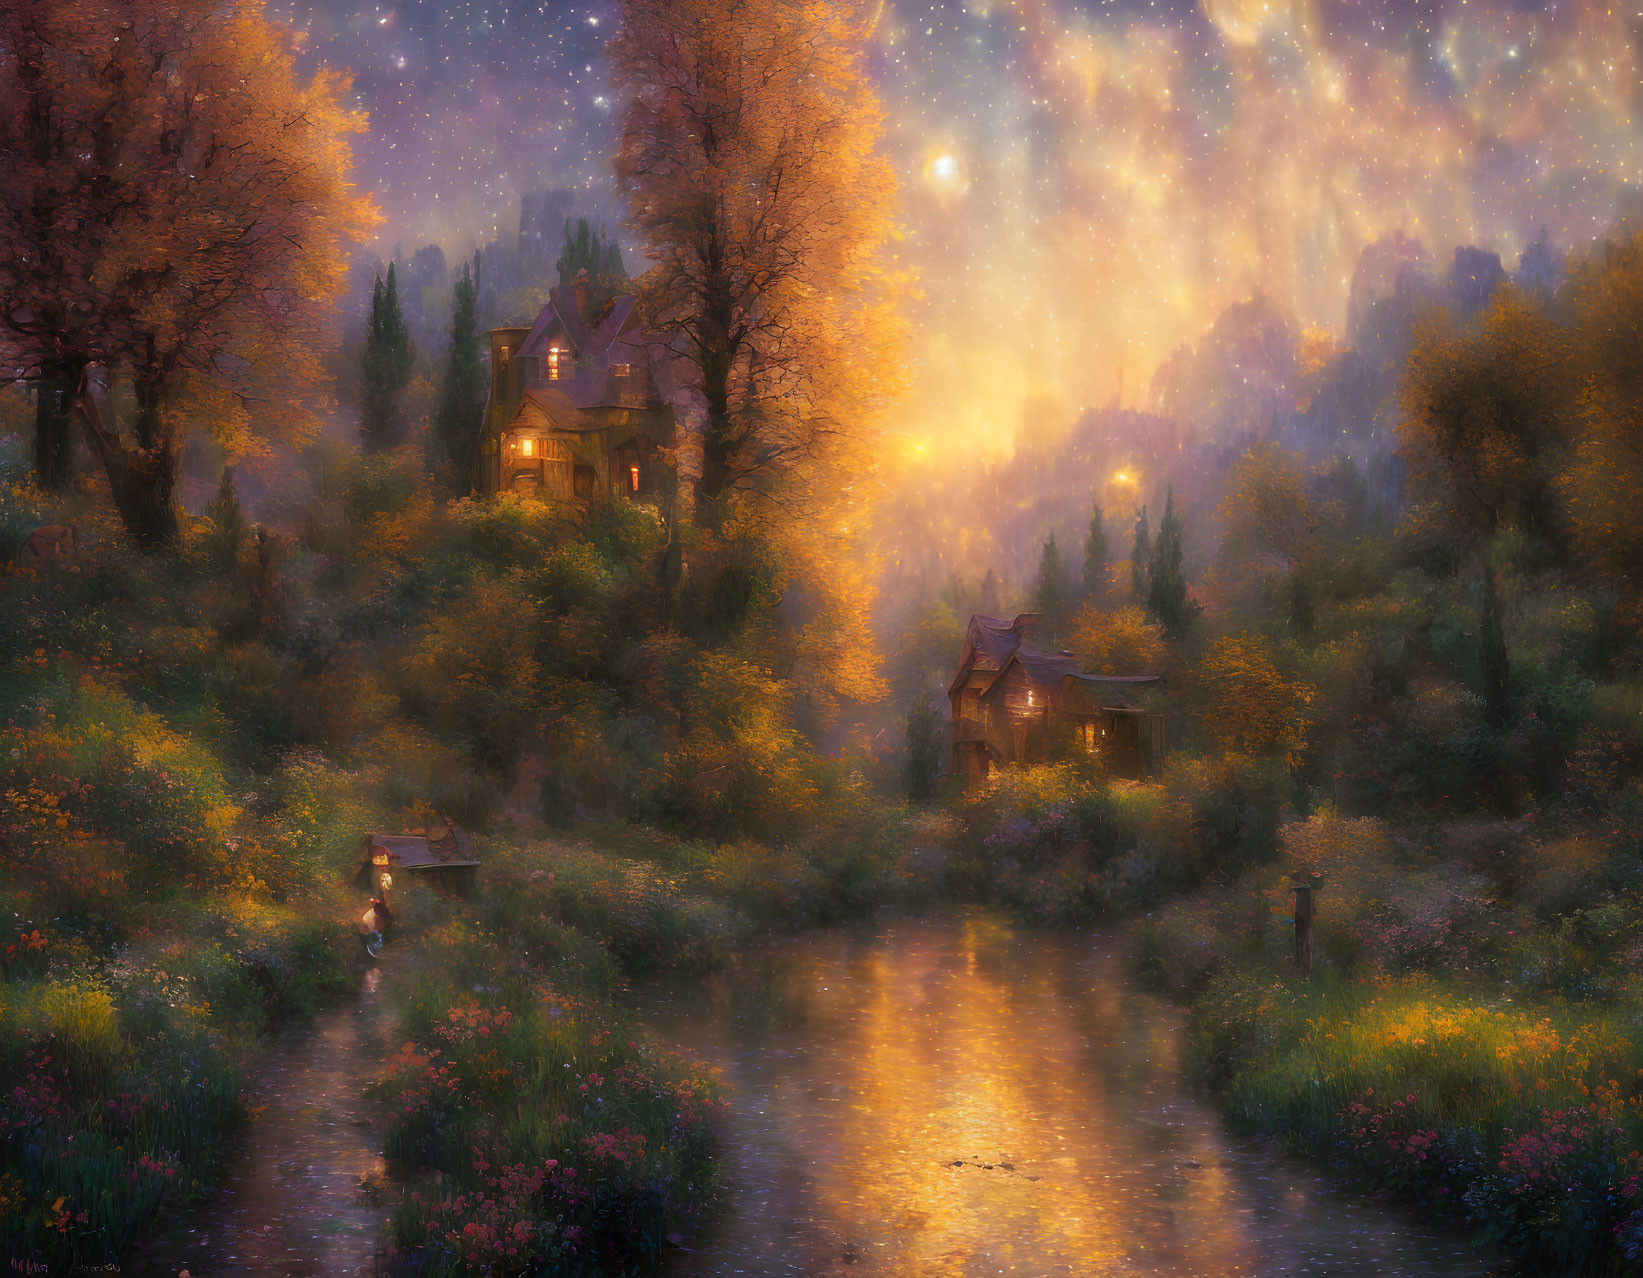 Fantastical landscape with glowing trees, river, and cozy houses